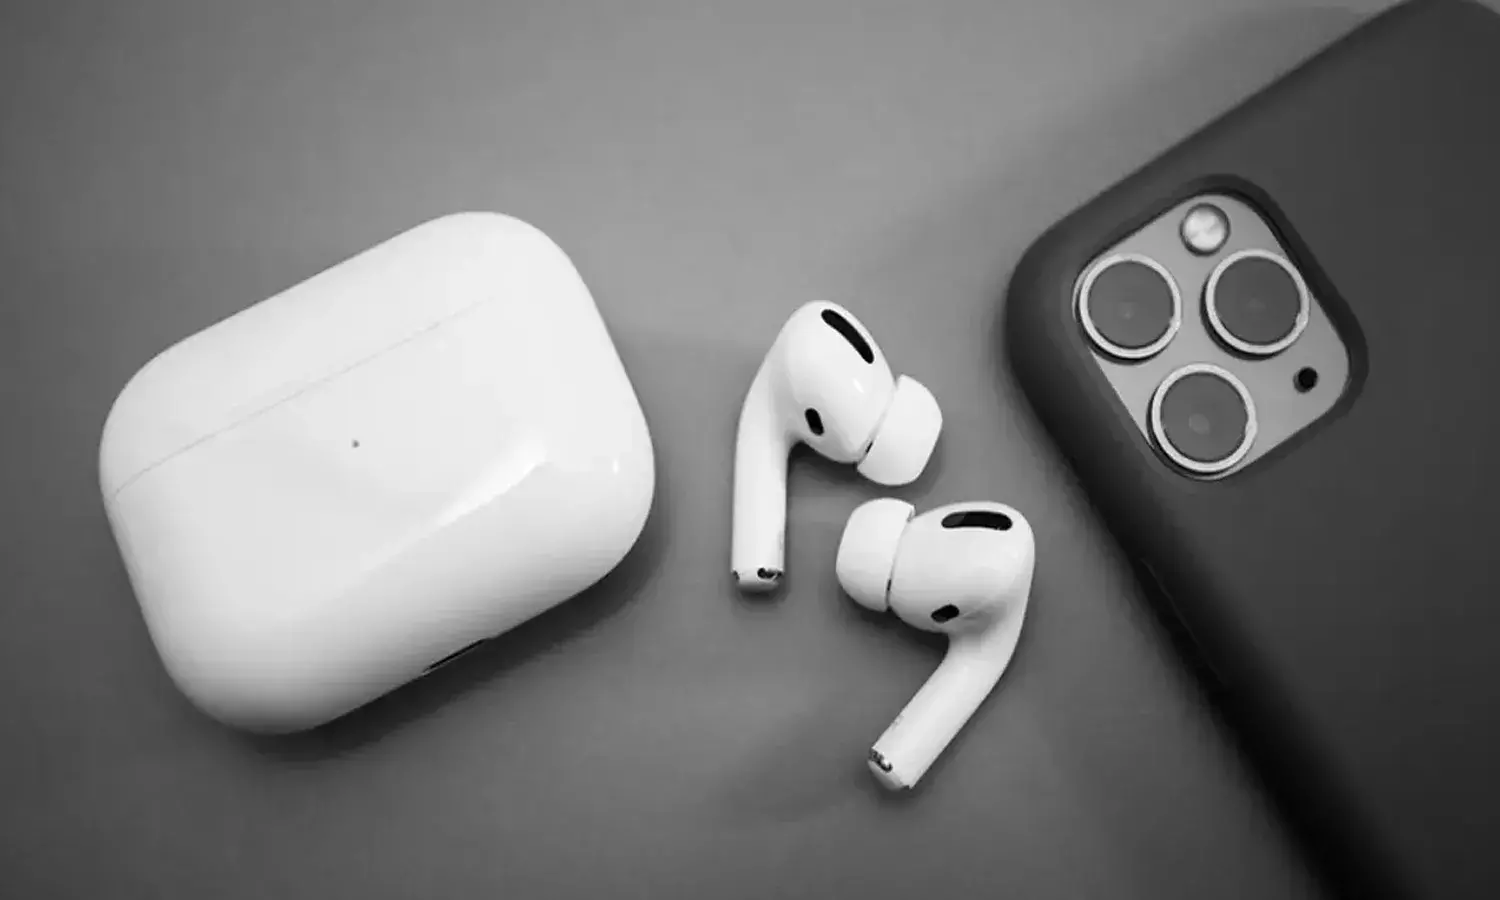 Apple Festive Offer Get Free Airpods With Iphone 12 Iphone 12 Mini Check Details